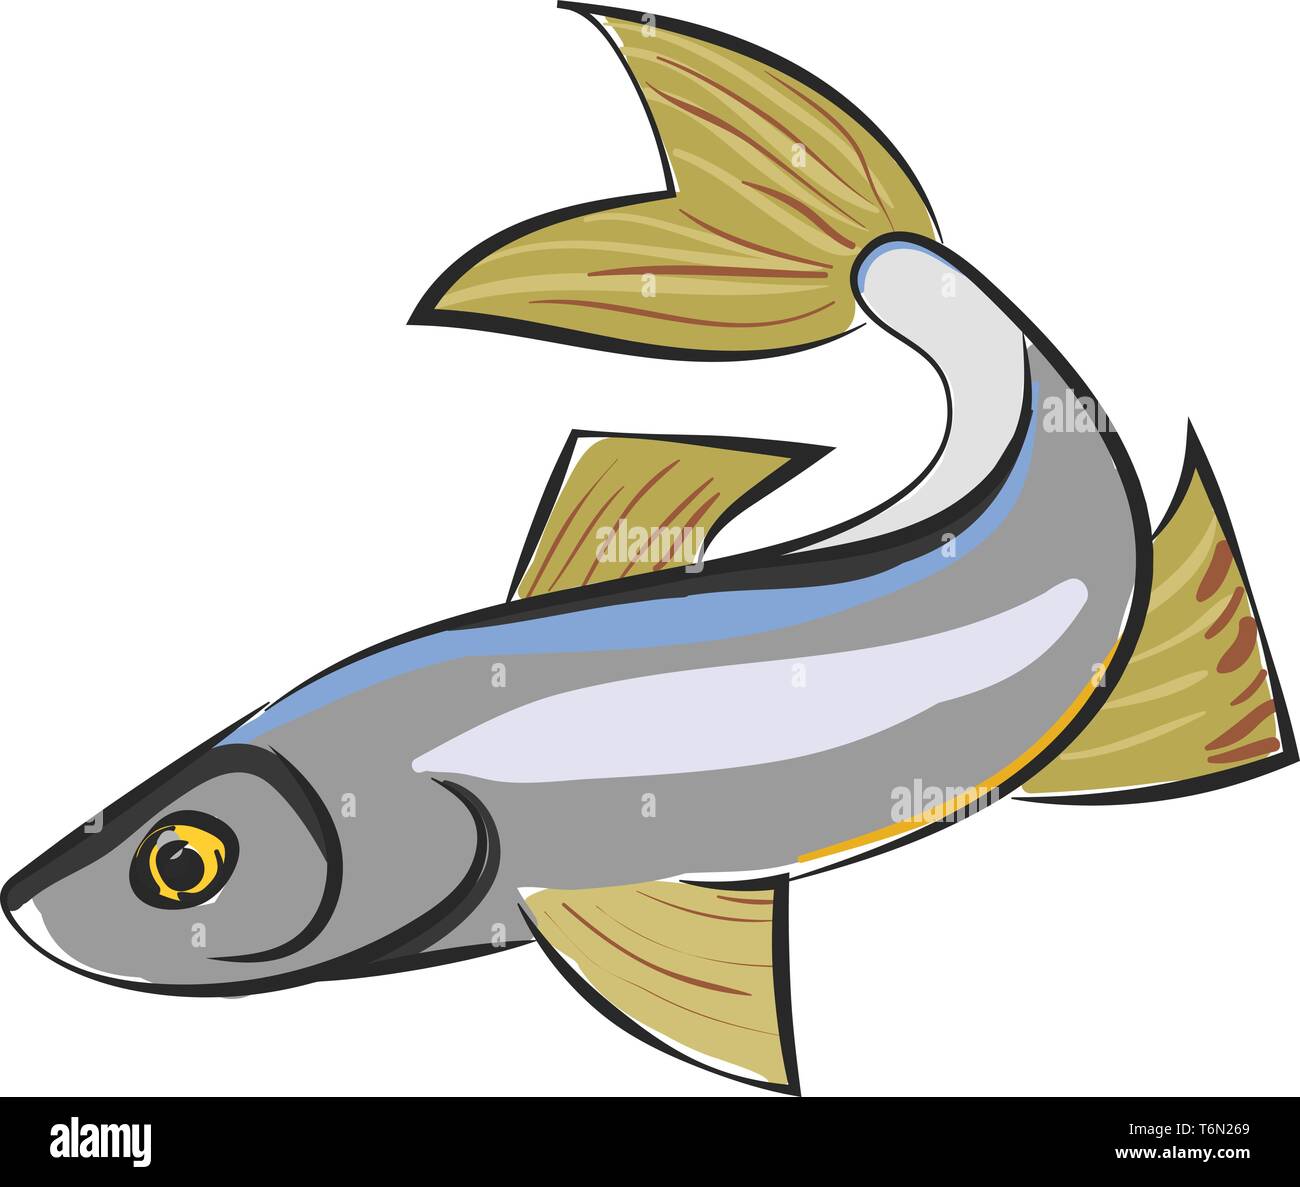 Clipart of a Sig fish with a streamlined silver body  yellow eyes  and green-colored fins and a paddle-shaped tail or caudal fin  vector  color drawin Stock Vector